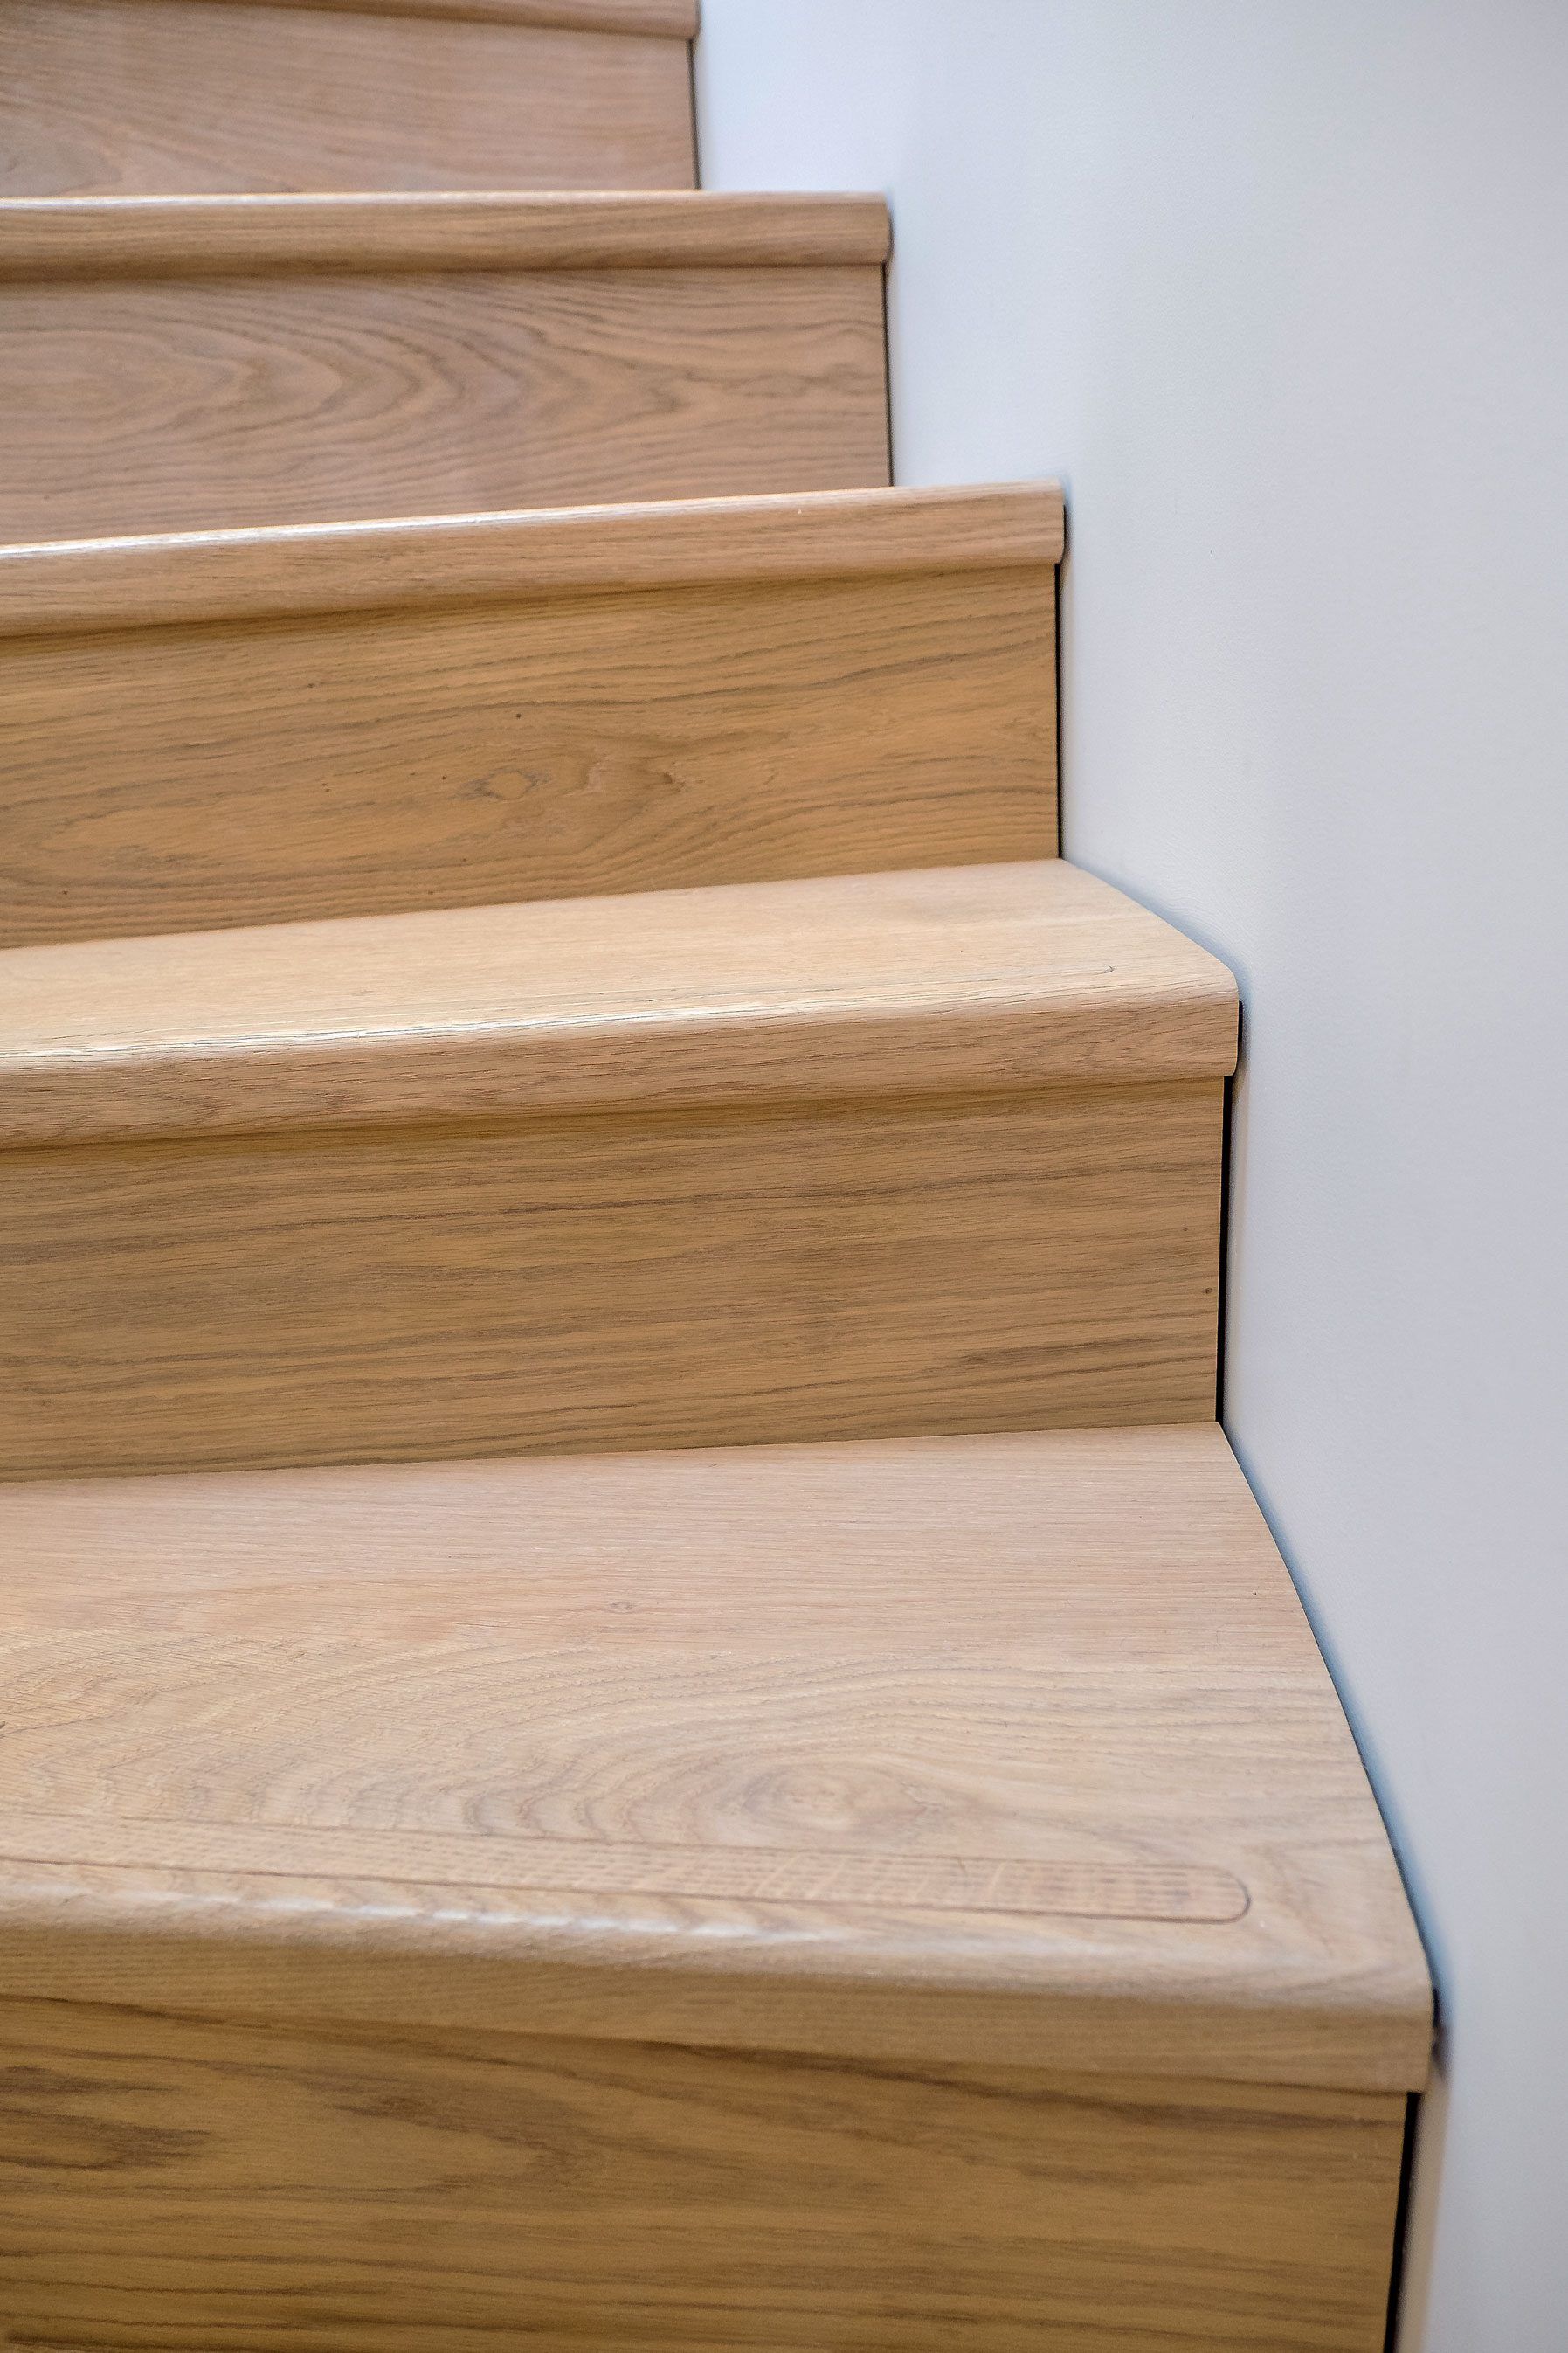 Oak stair treads and risers meeting a plastered wall and shadow gap detail.